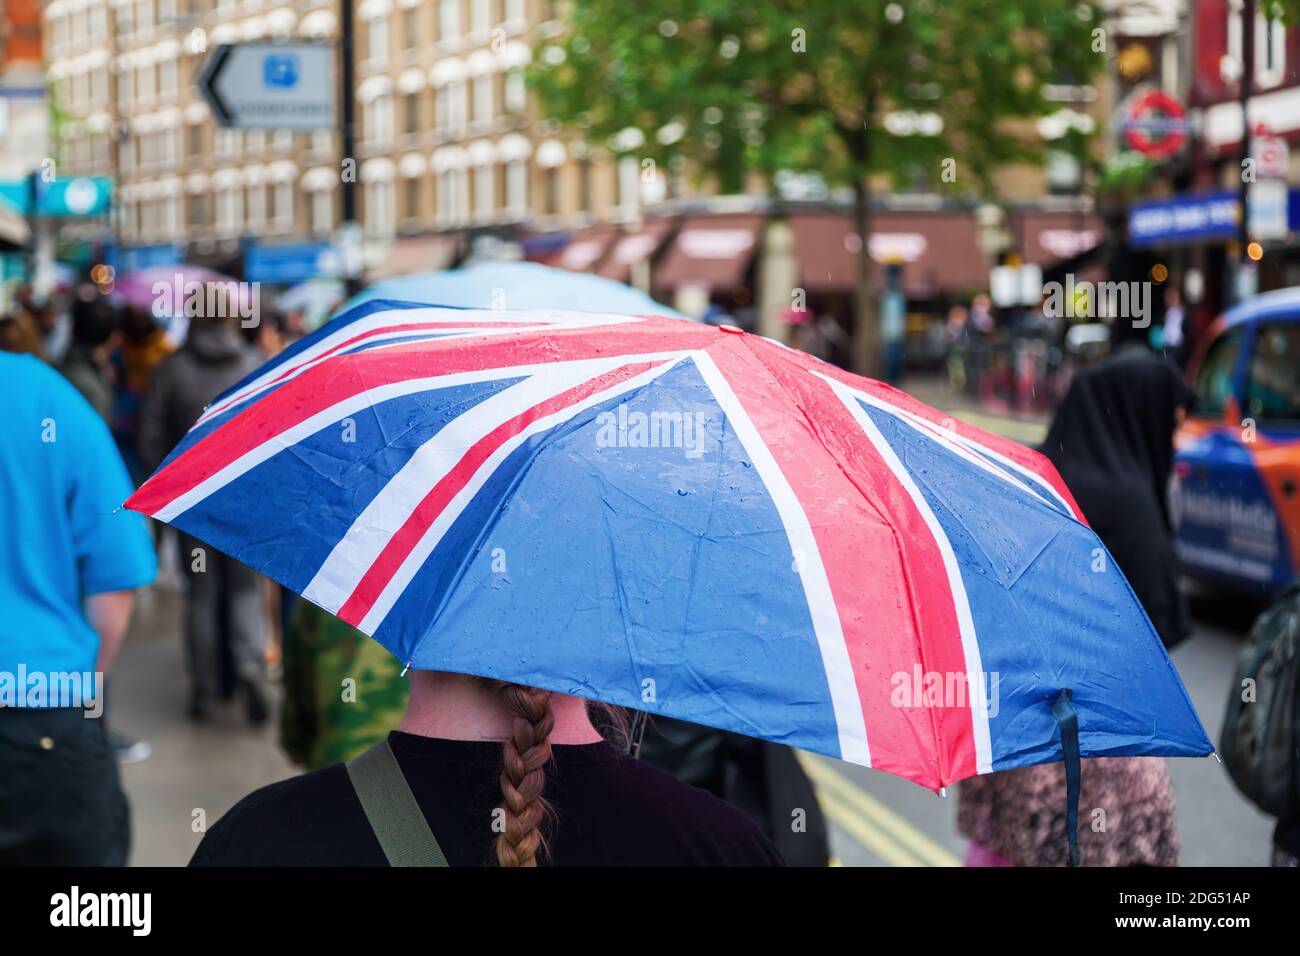 Rainy day in London with a woman wearing an umbrella with the flag of Great Britain Stock Photo